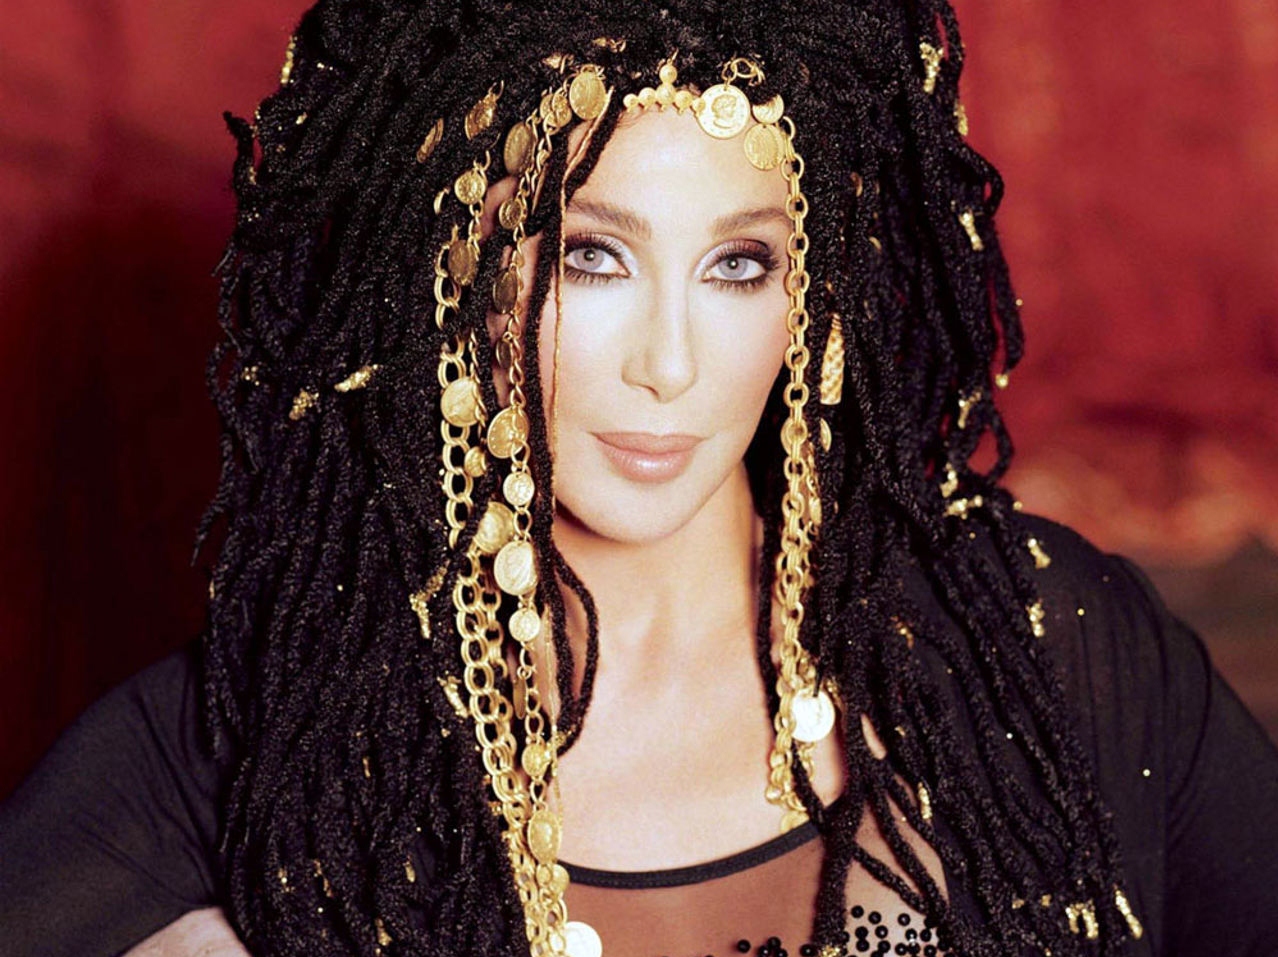 Cher Uses McCarthyism to Attack Romney